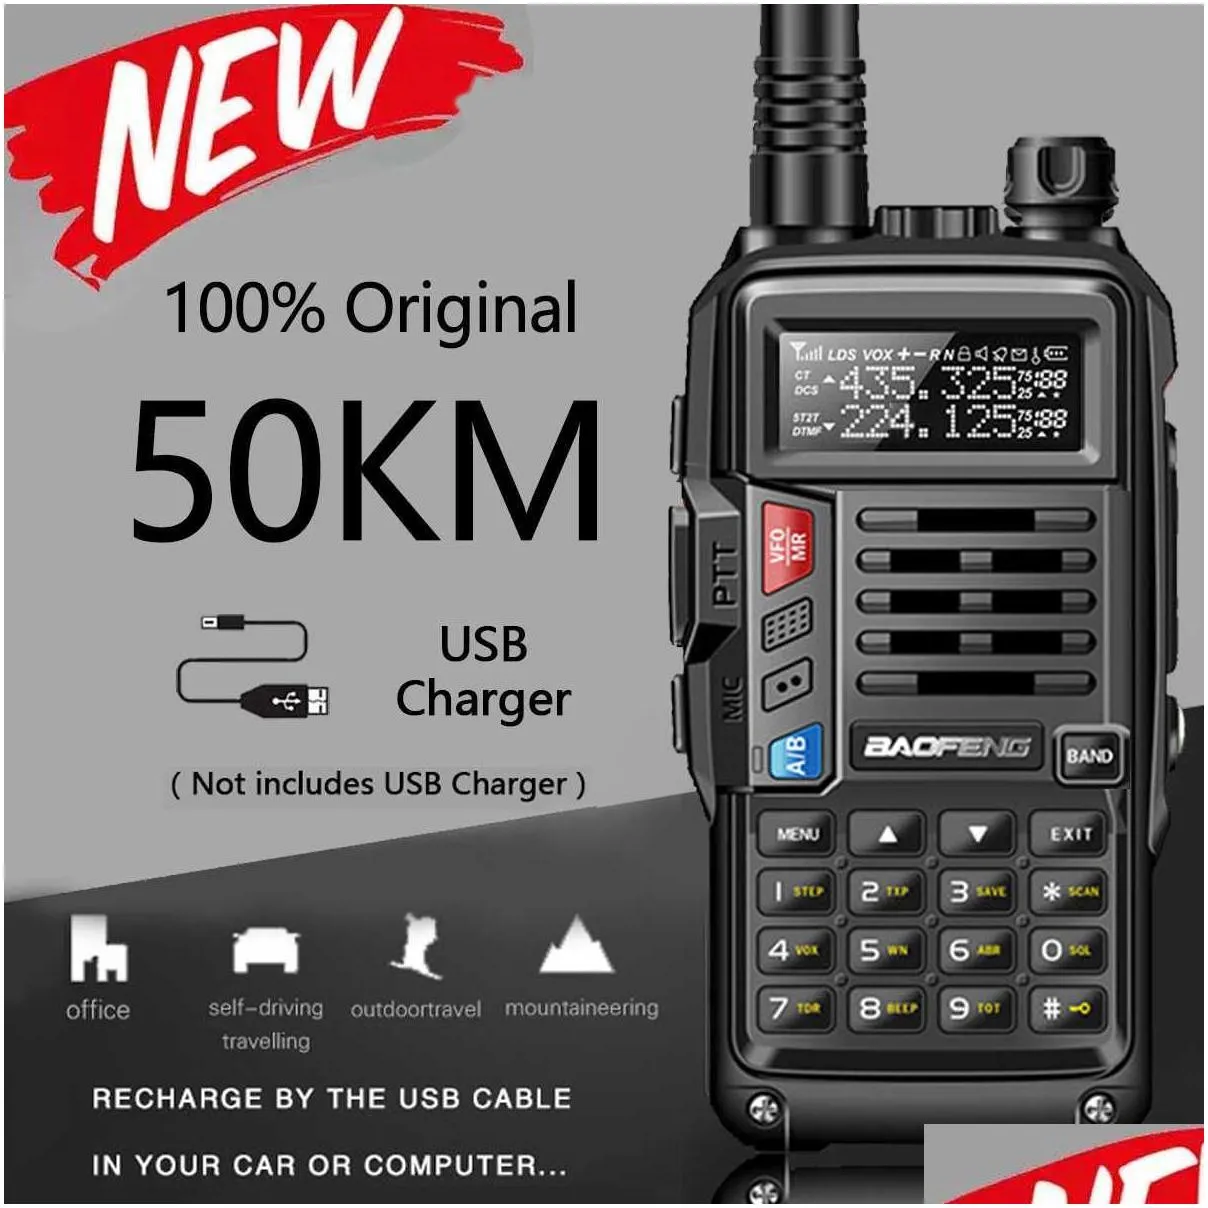 BaoFeng UV-S9 Plus Powerful Walkie Talkie CB Radio Transceiver 10W 50 KM Long Range Portable For hunt forest upgrade 210817